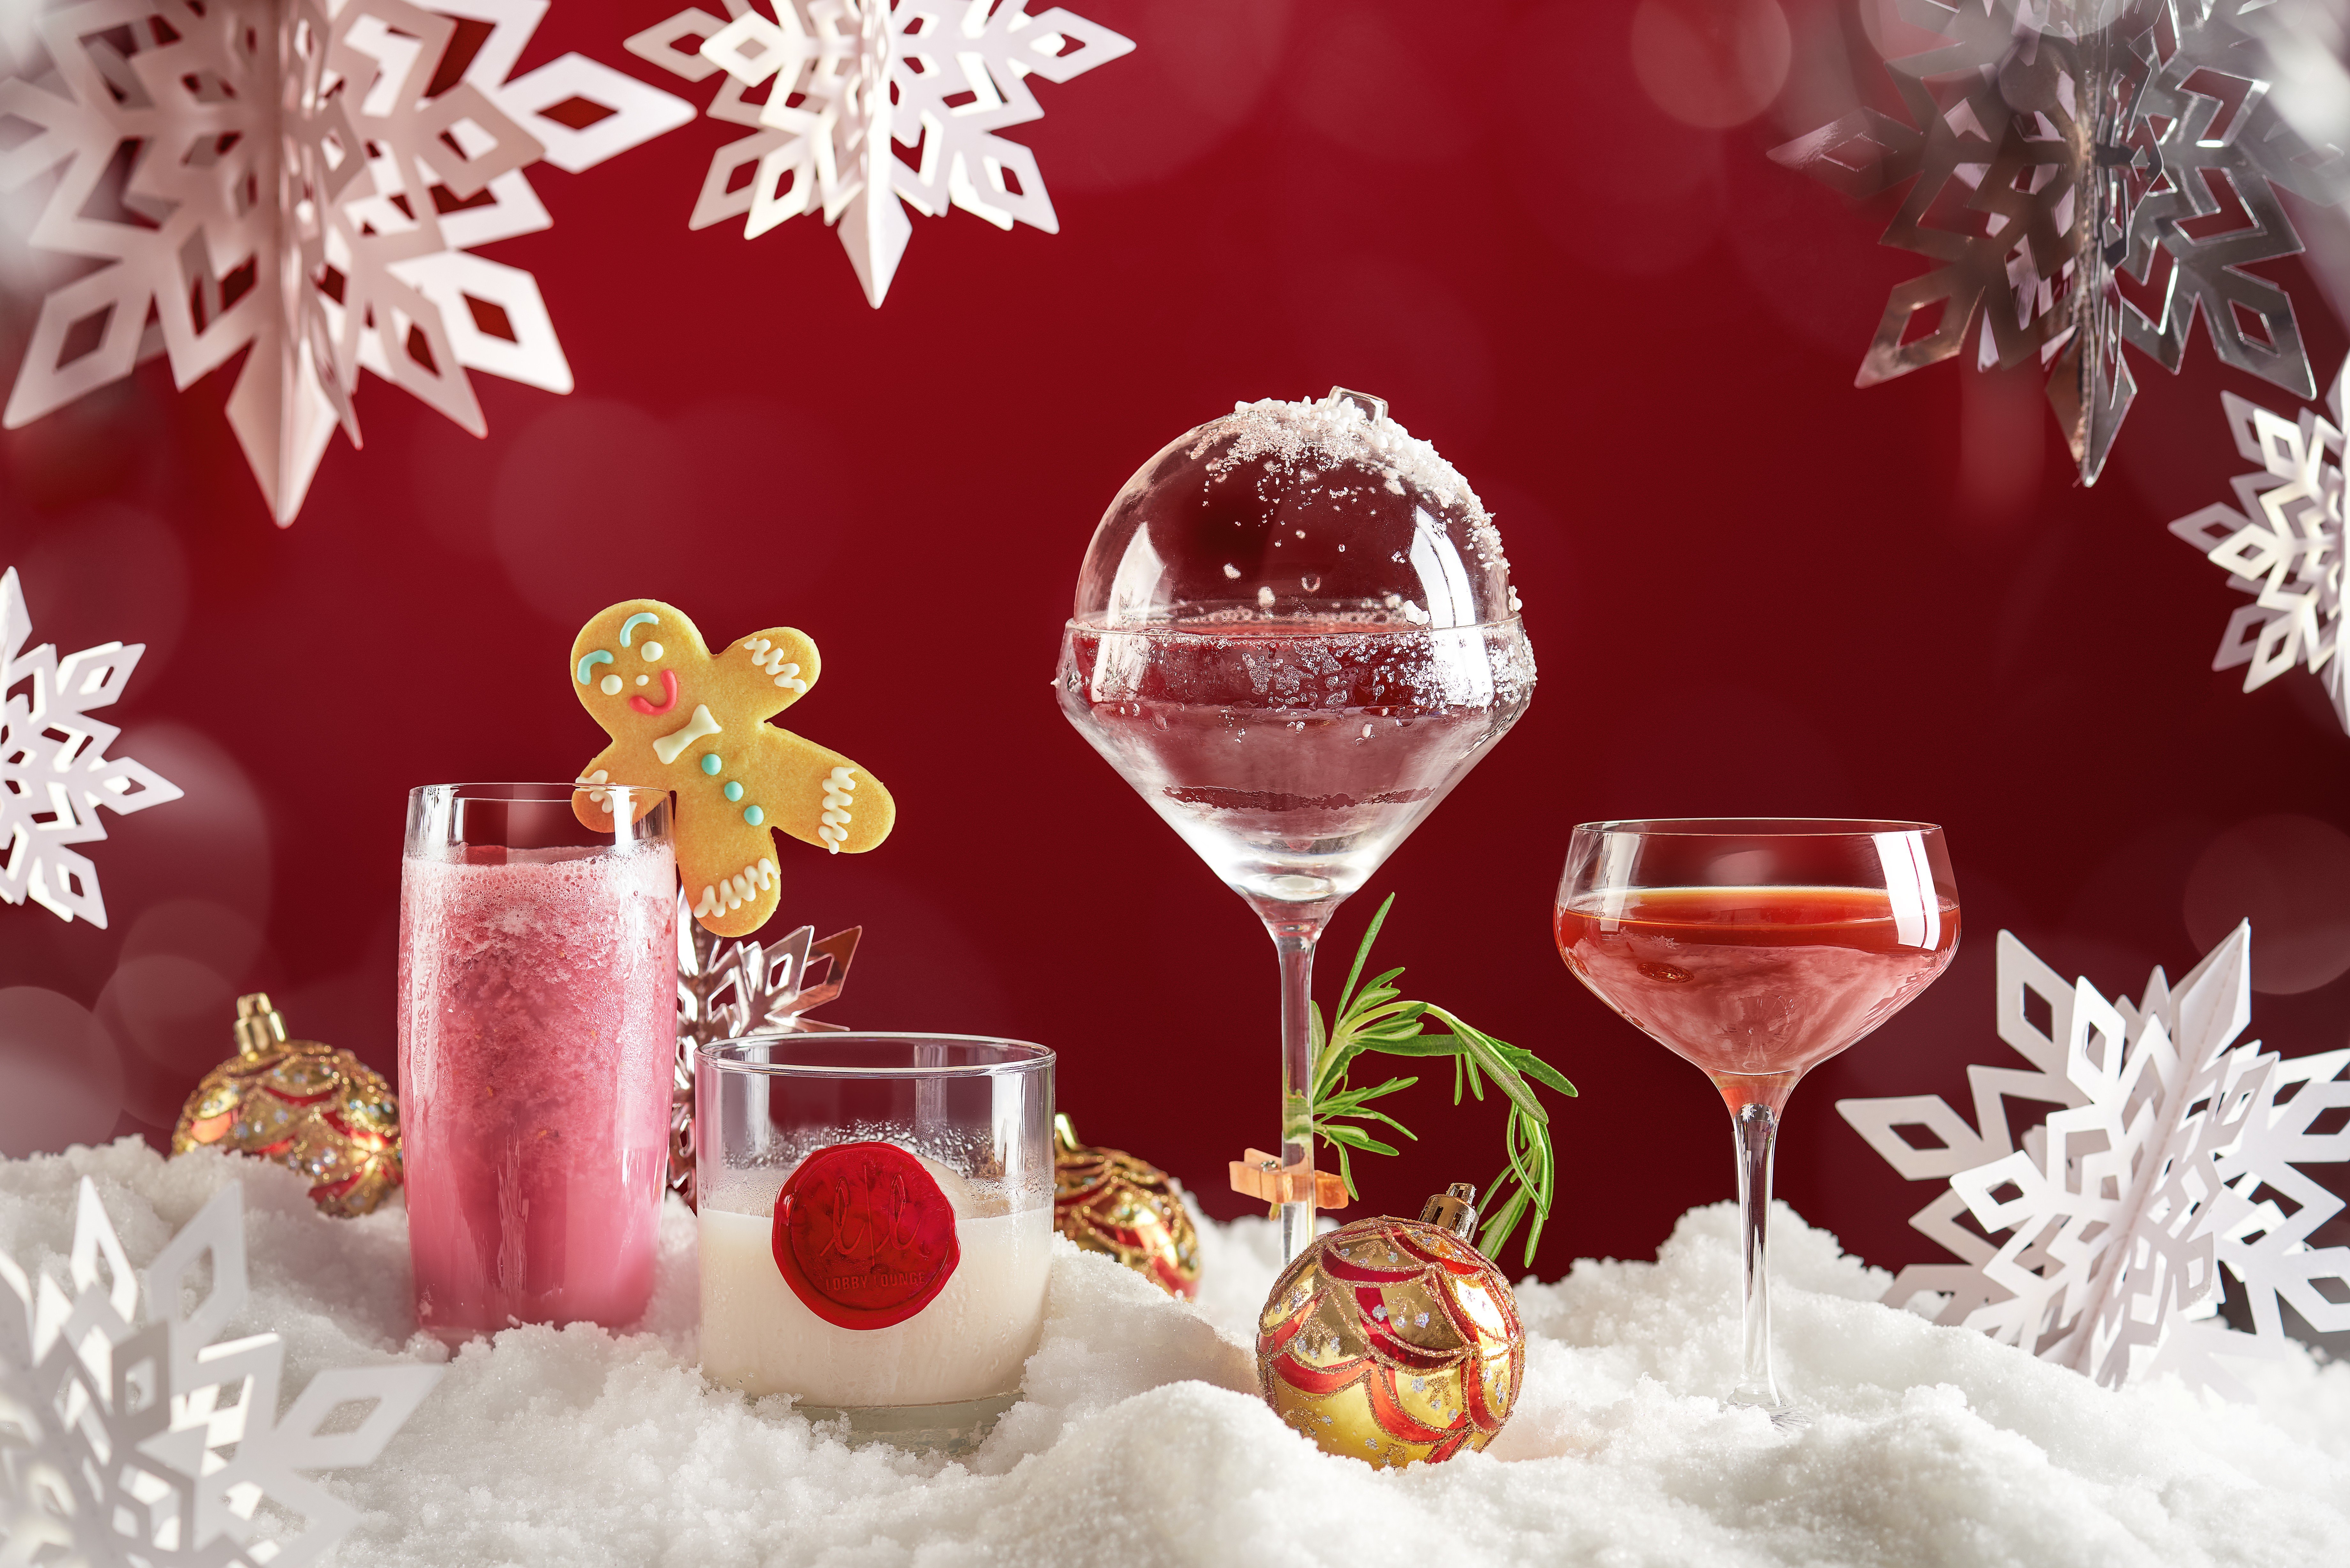 Christmas cocktails at the InterContinental Hong Kong are among the festive treats on offer this season. From left, ‘Victor’ the gingerbread man; sugar cane rush; the ornament; lobby lounge Christmas delight. Photo: Handout